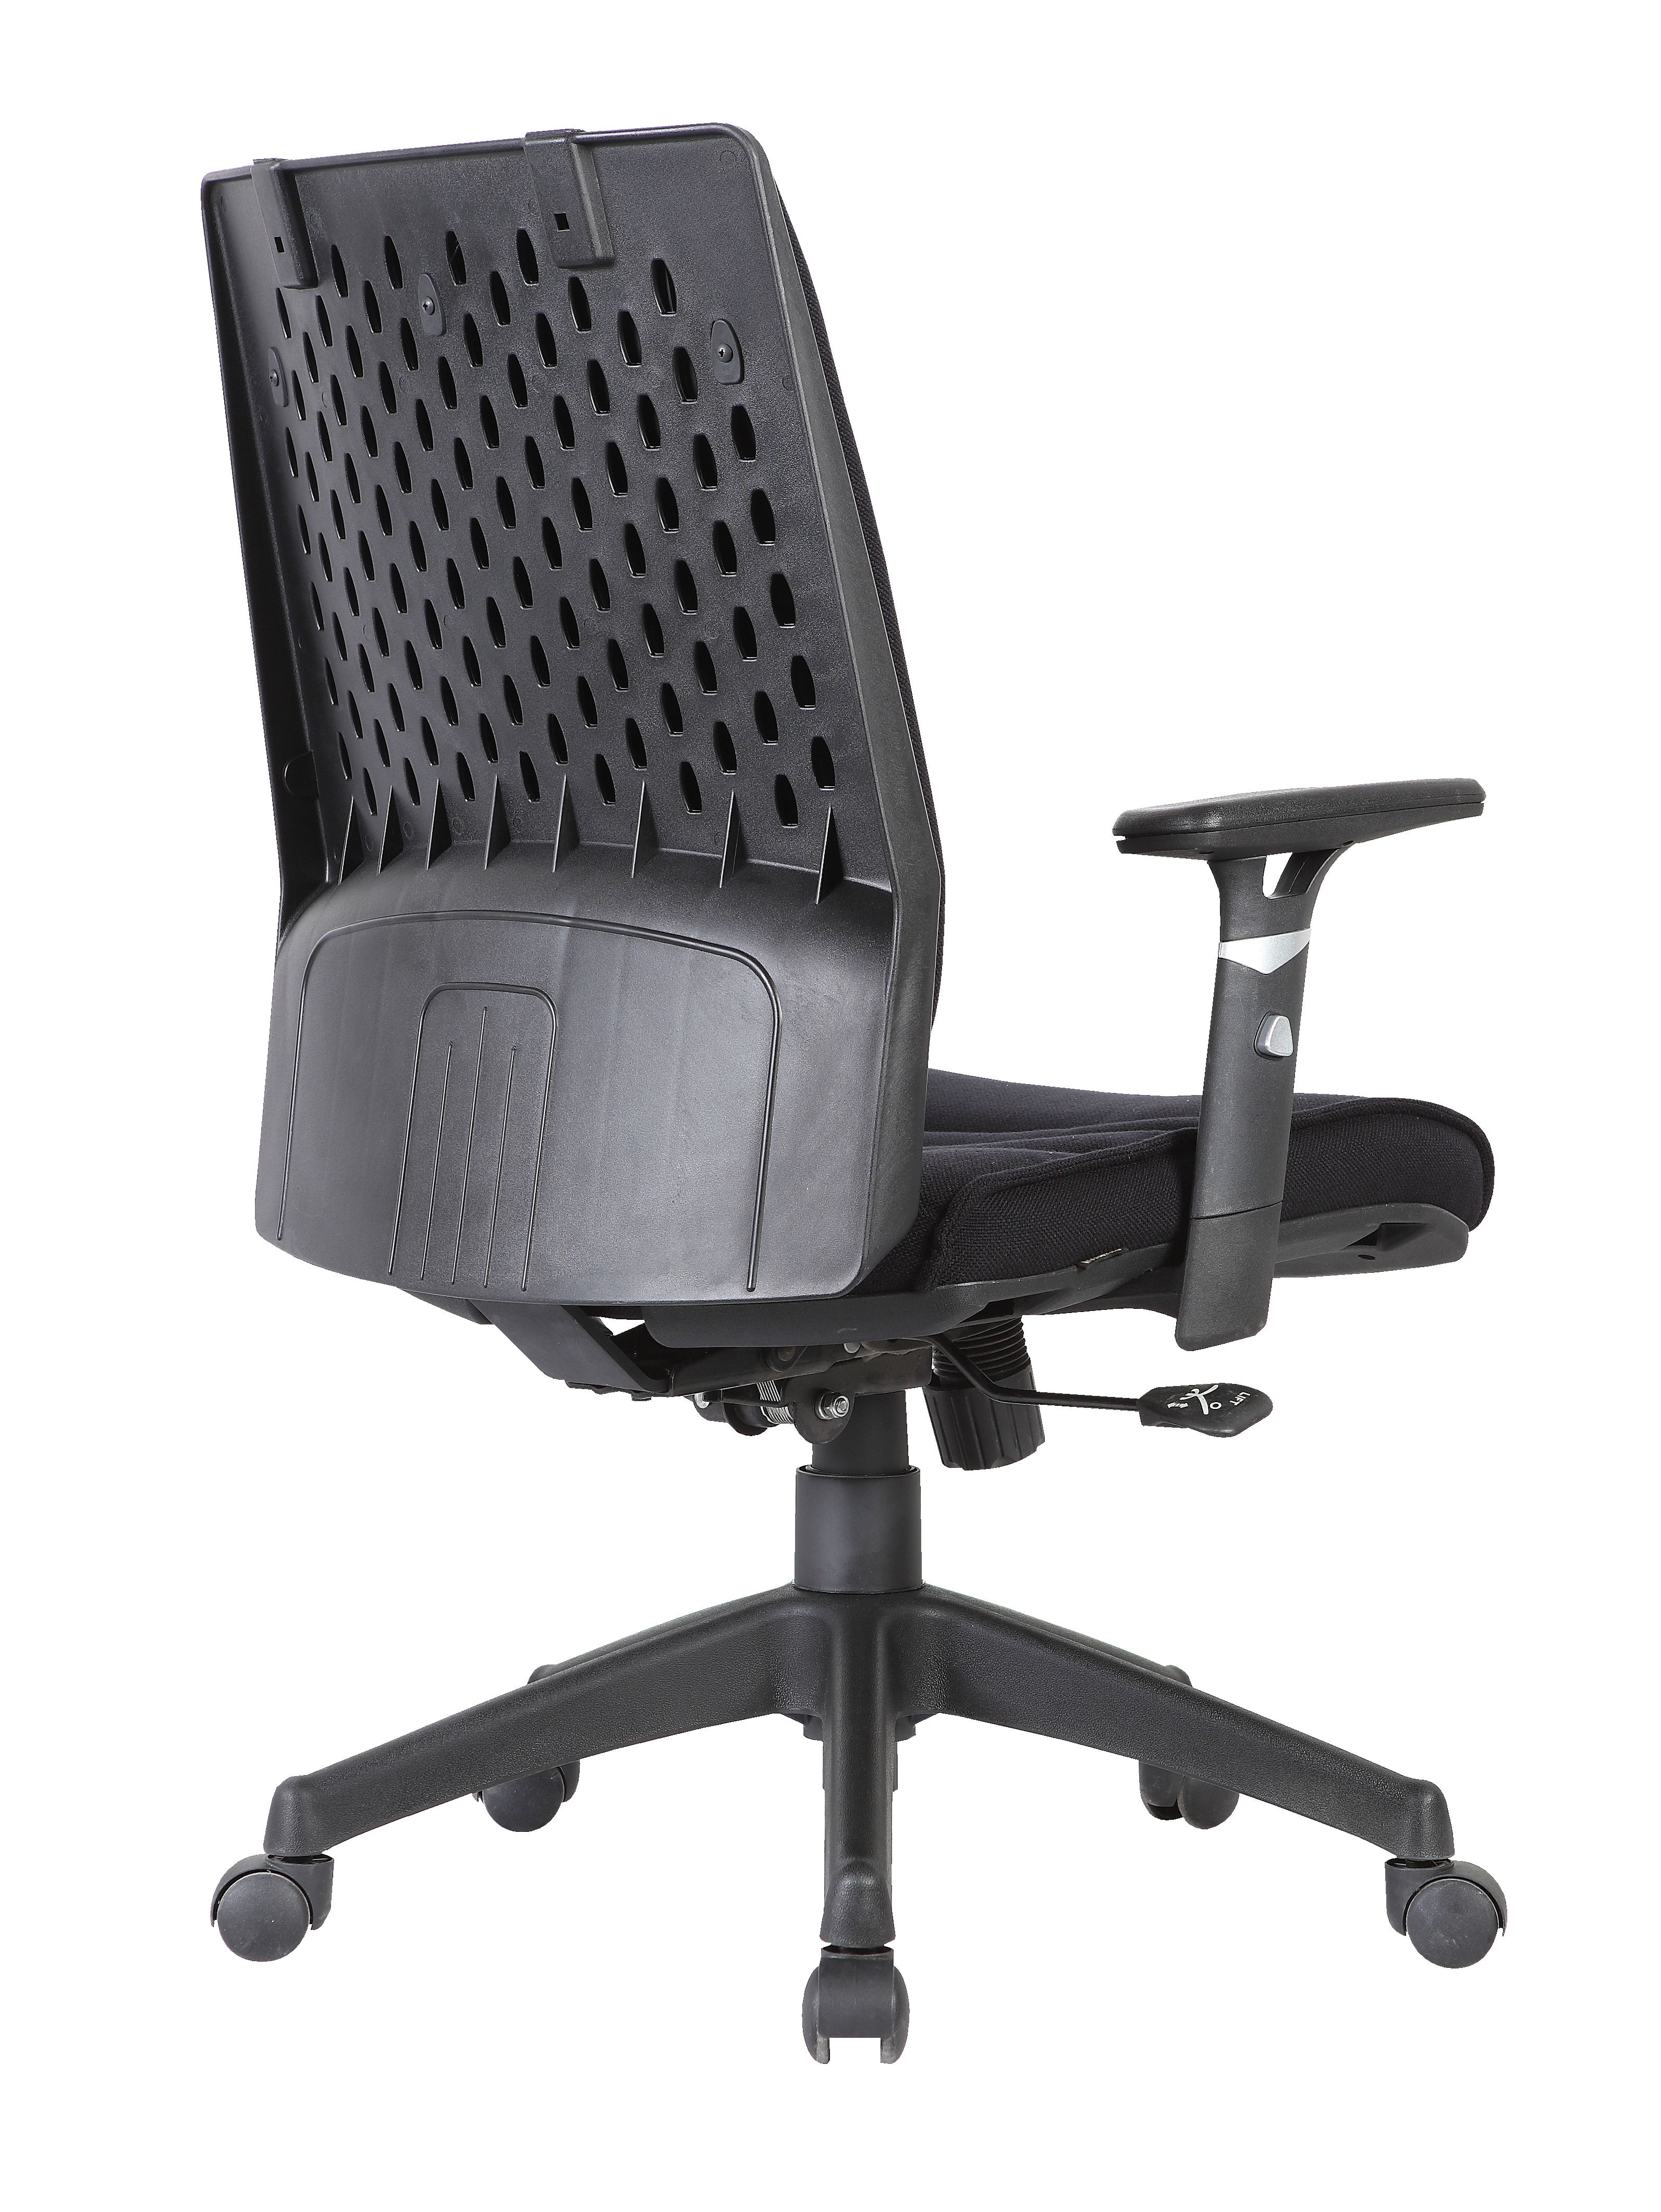 How to Select Appropriate Chair for Students？